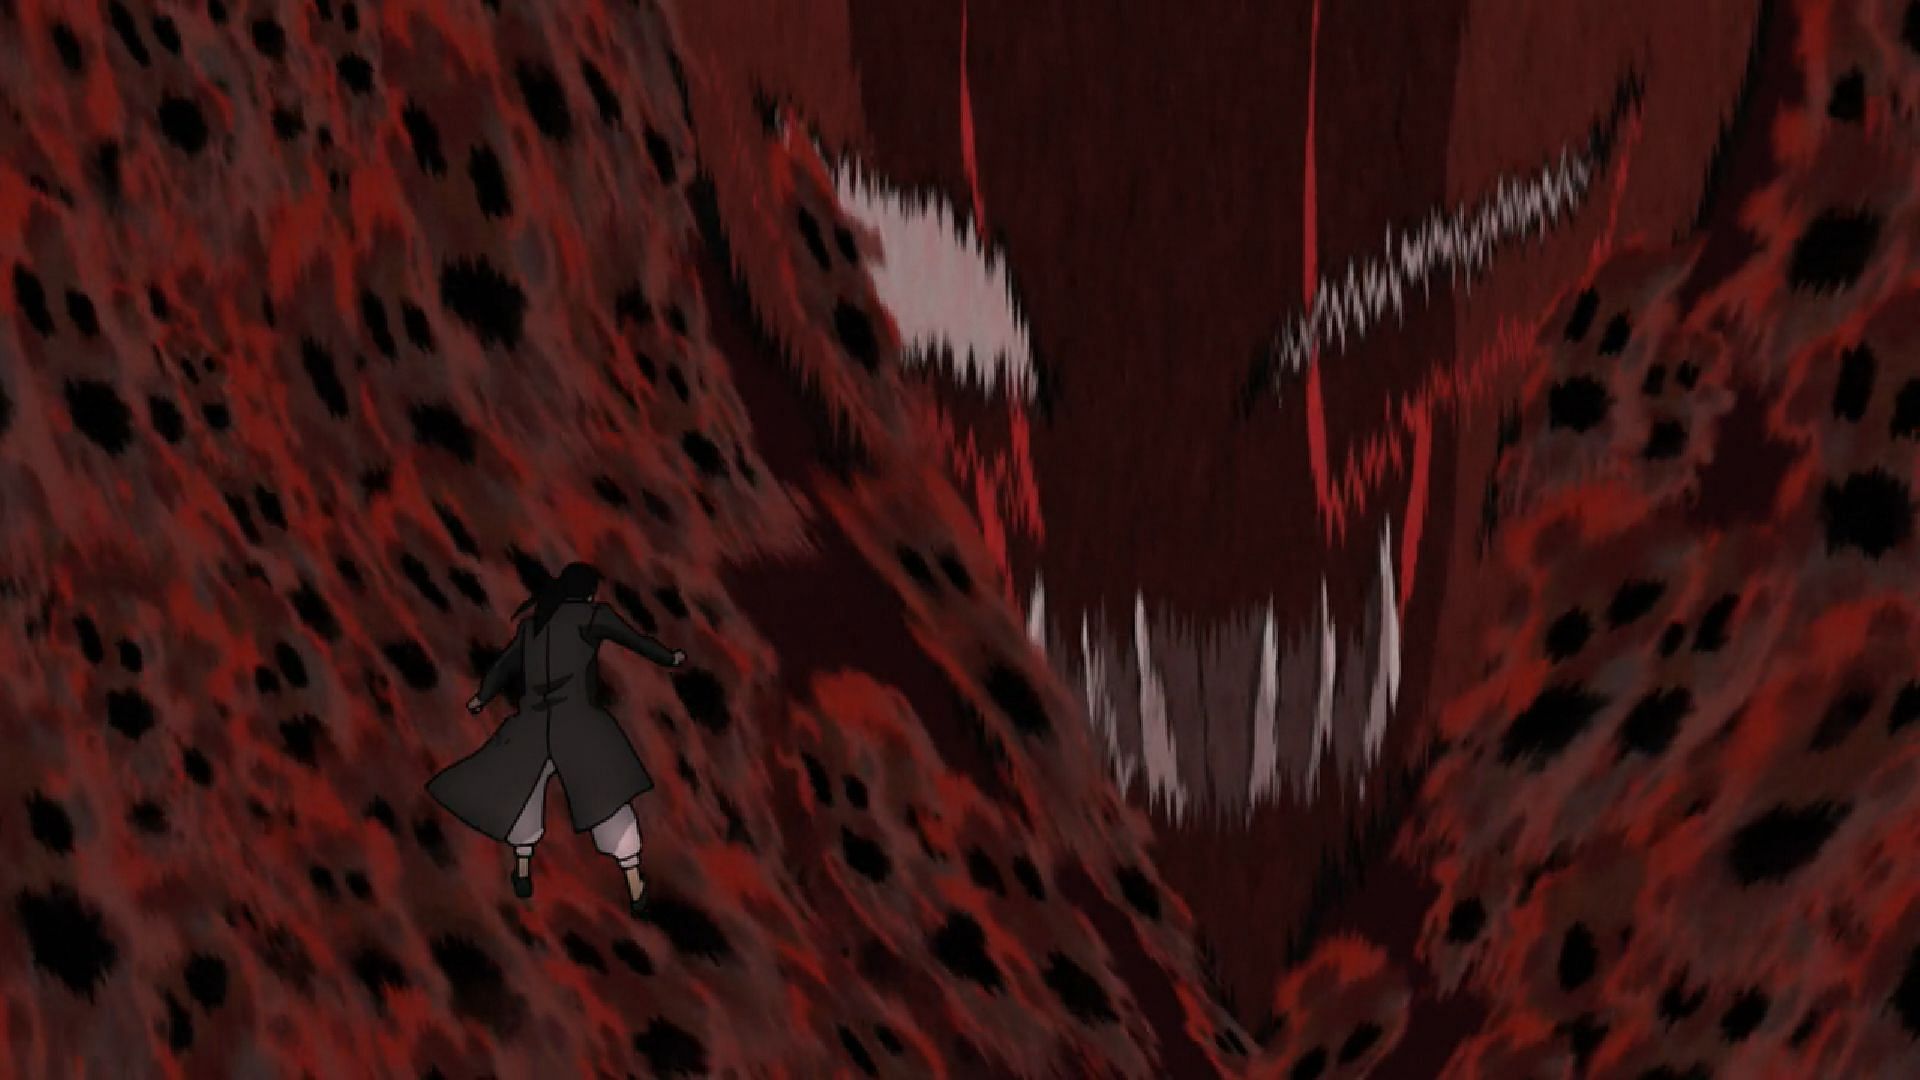 Greed (right) and Ling (left) as seen in the Fullmetal Alchemist: Brotherhood anime series (Image via BONES)